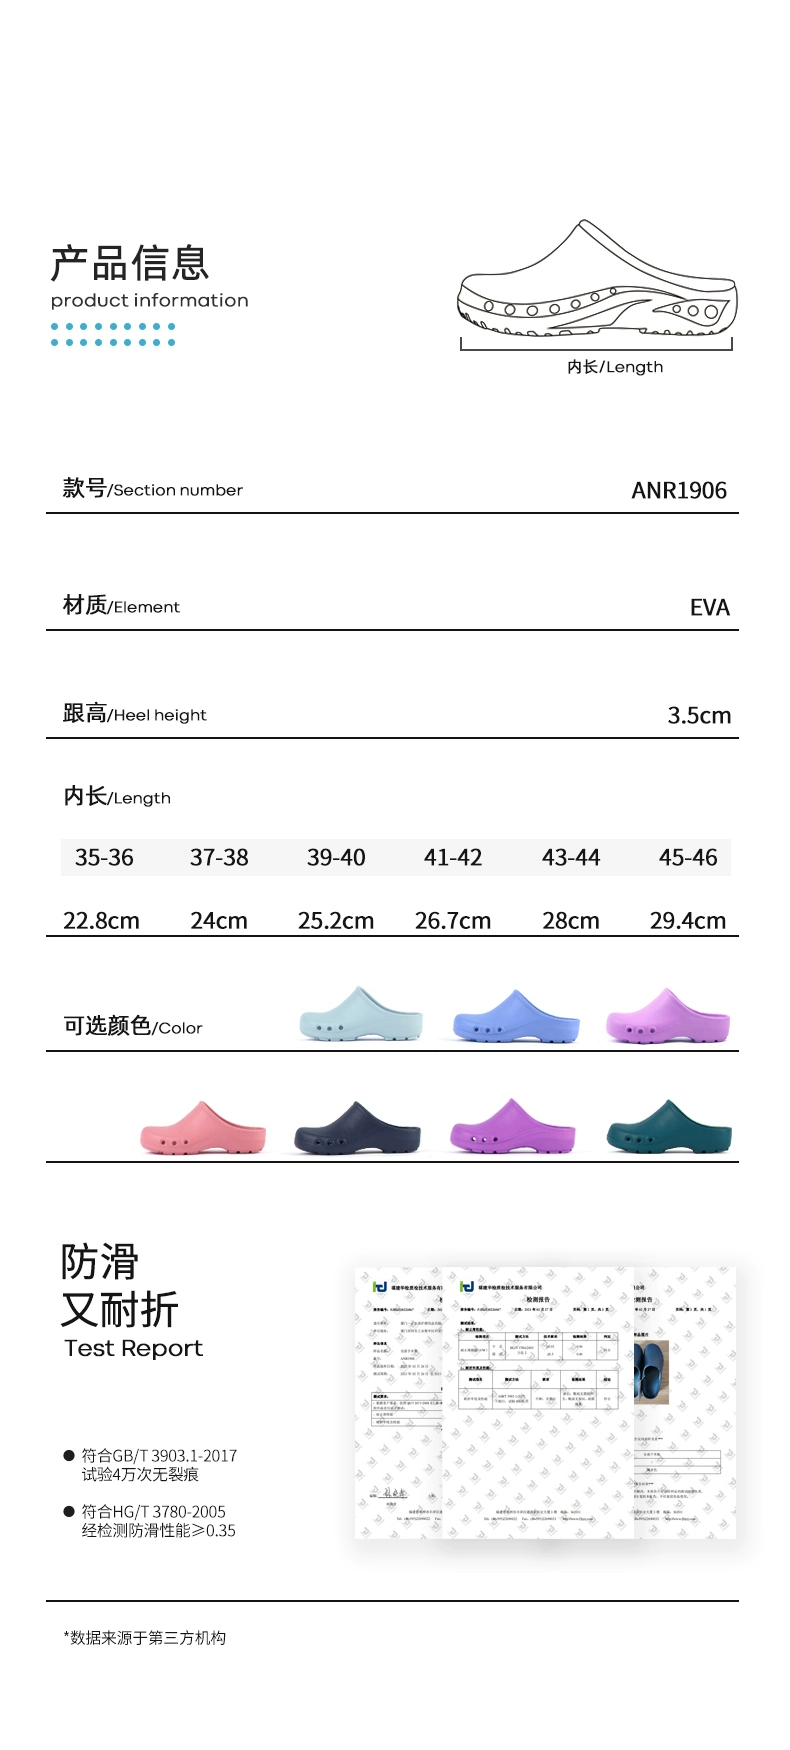 Annuo operating room slippers protective shoes spring and autumn work shoes doctor hospital department nurse slippers comfortable soft heel shoes